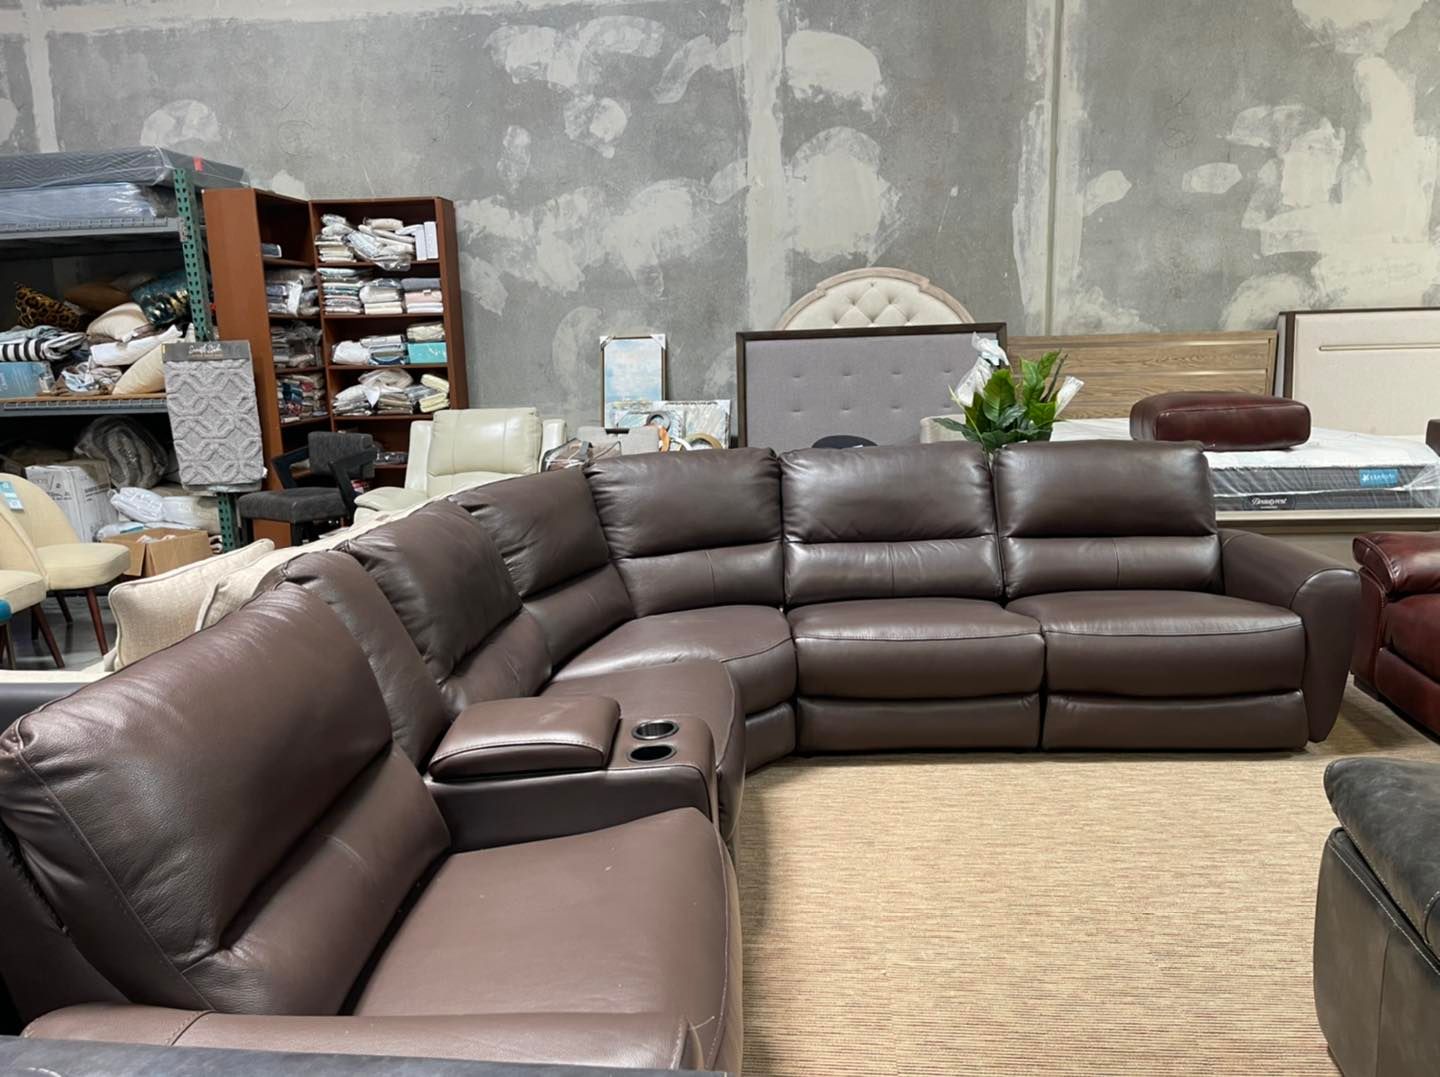 danvors 6-pc. leather sectional sofa